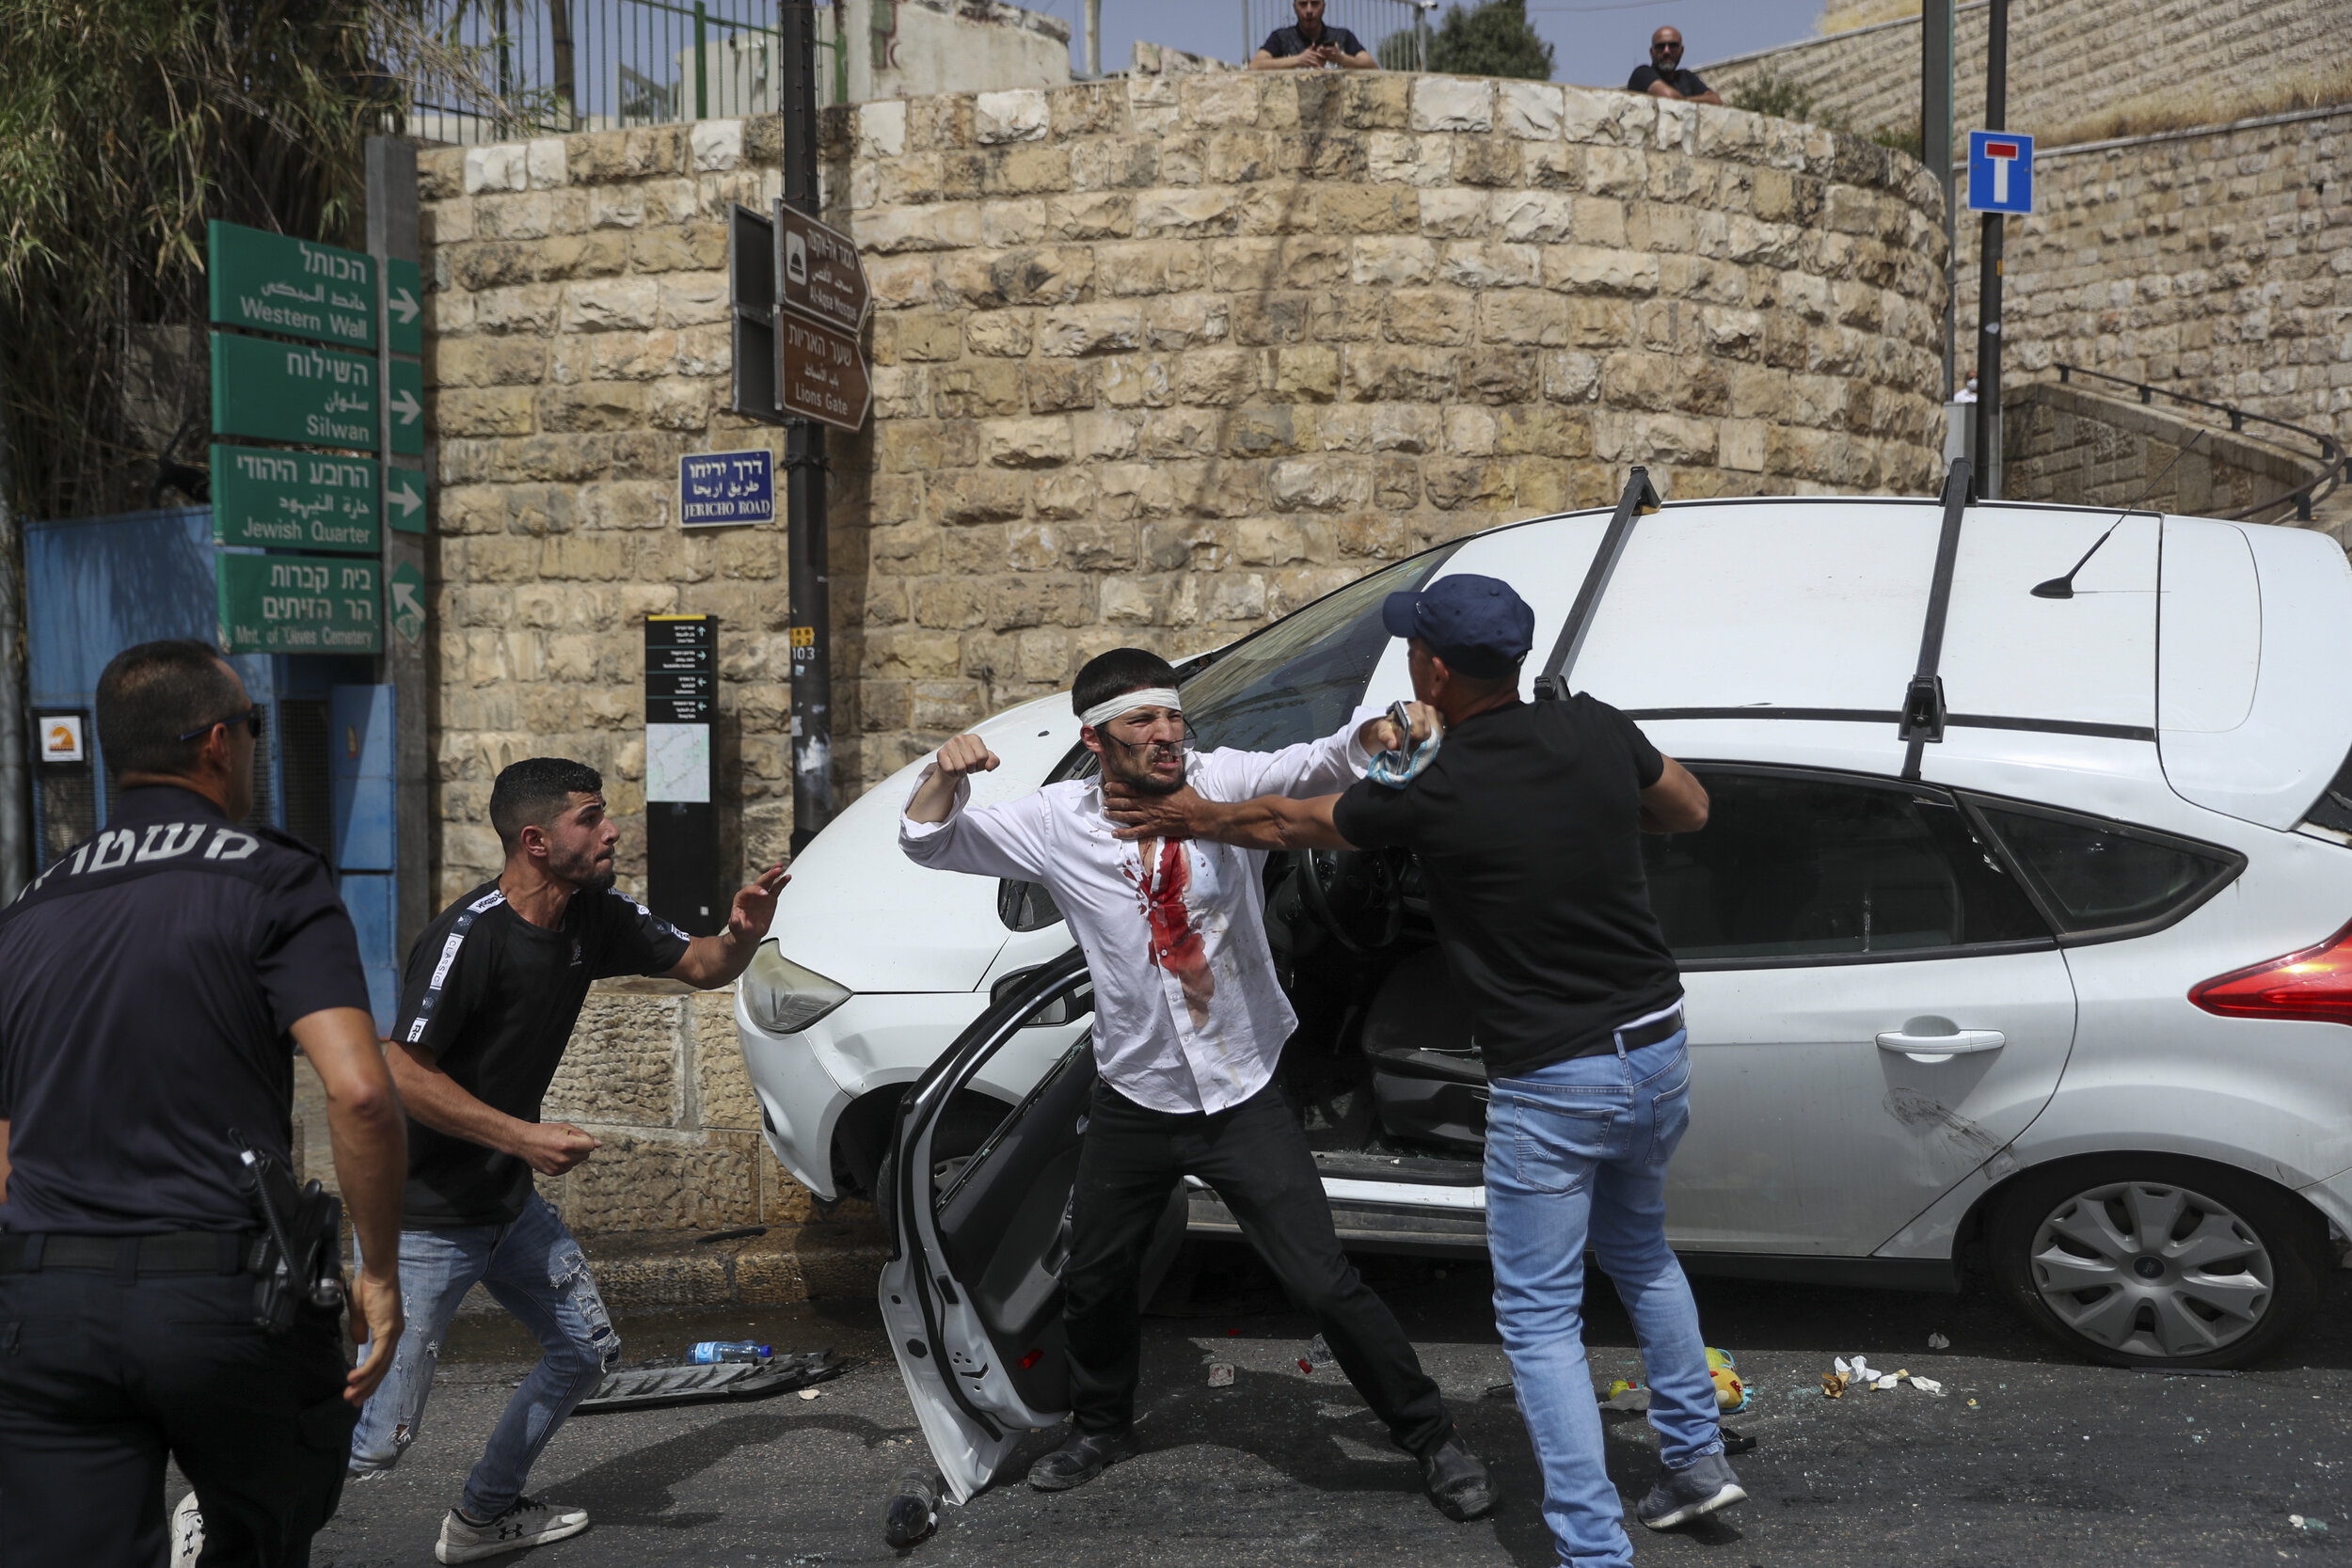  A Jewish driver, center, scuffles with Palestinians after he was attacked by Palestinian protesters near Jerusalem's Old City. Monday, May 10, 2021. Israeli police clashed with Palestinian protesters at a flashpoint Jerusalem holy site on Monday. (A